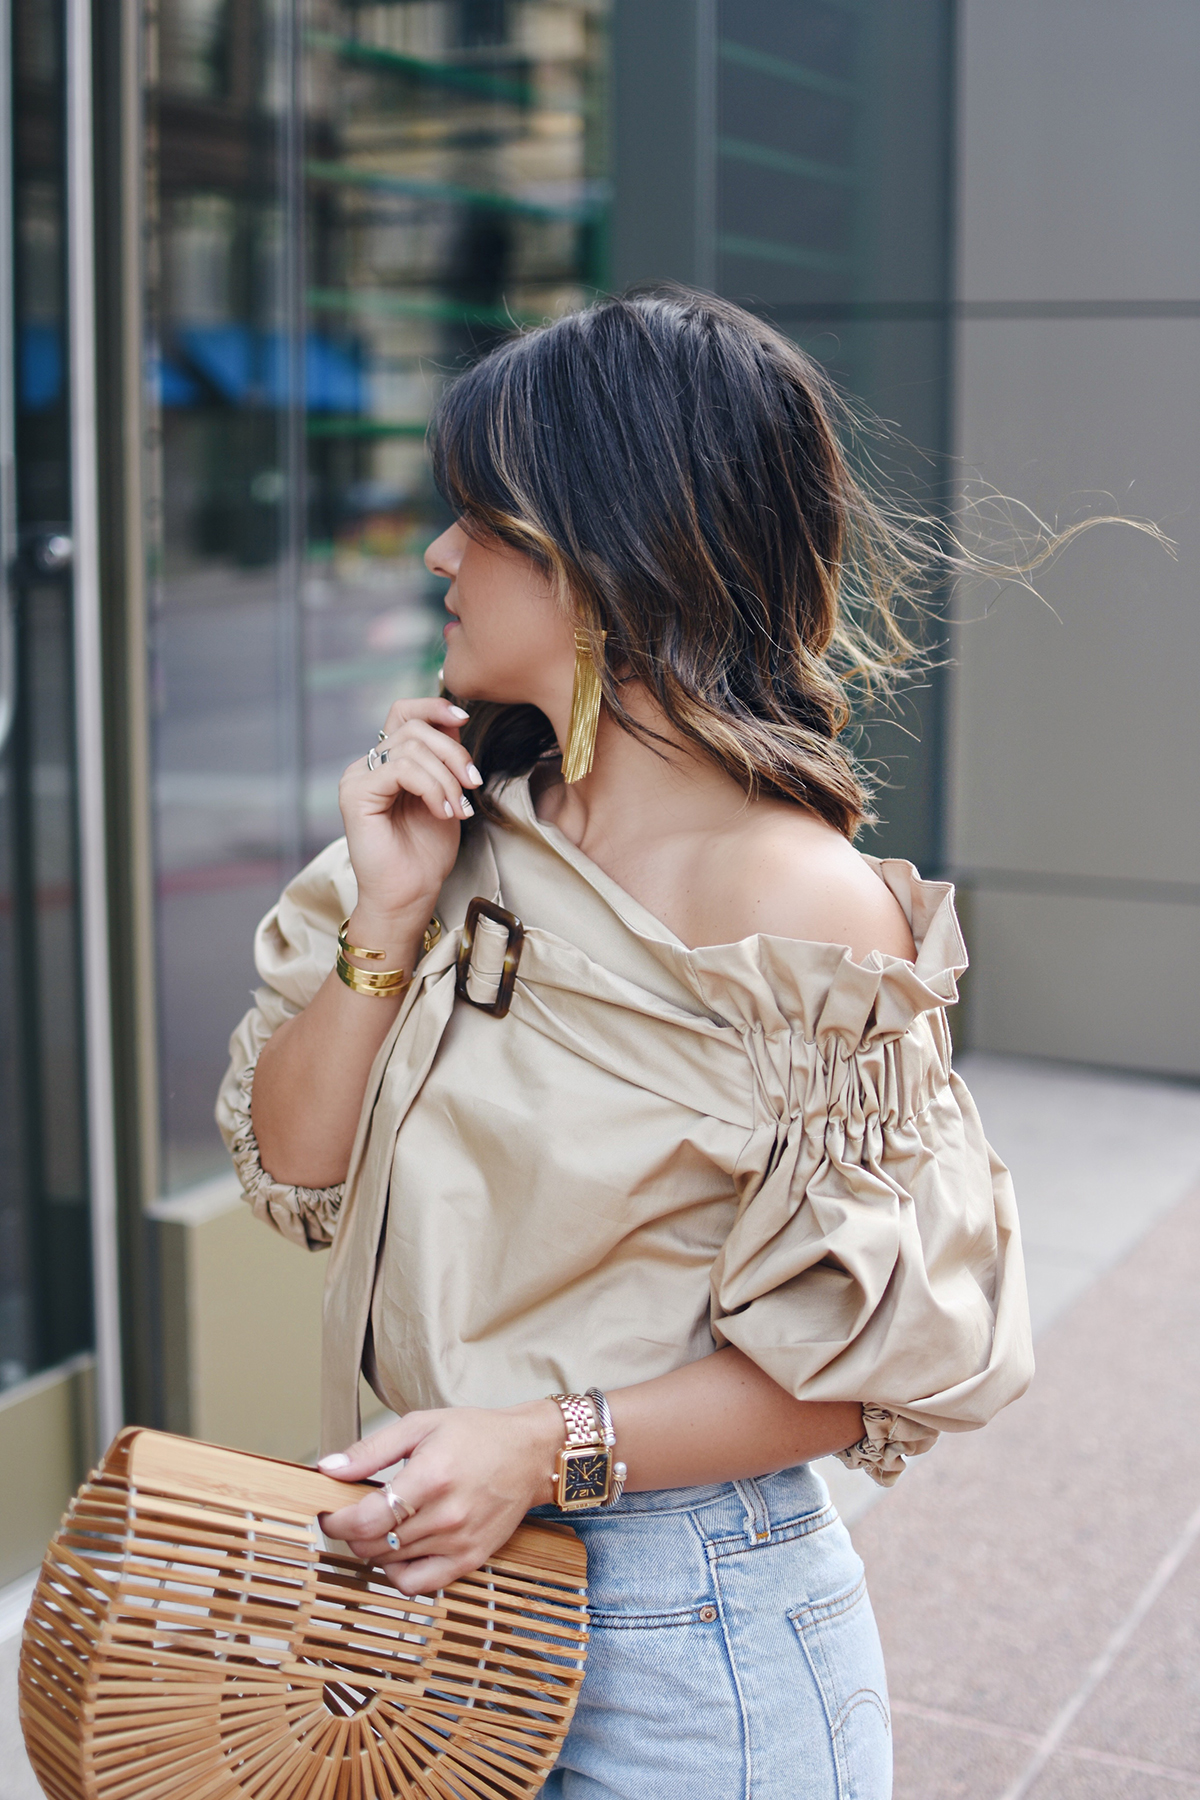 Carolina Hellal of Chic Talk wearing a Style Mafia beige belted top, 501 levis , cultagaia ark bag and steve madden strap sandals - BEIGE BELTED BLOUSE style by popular Denver fashion blogger Chic Talk